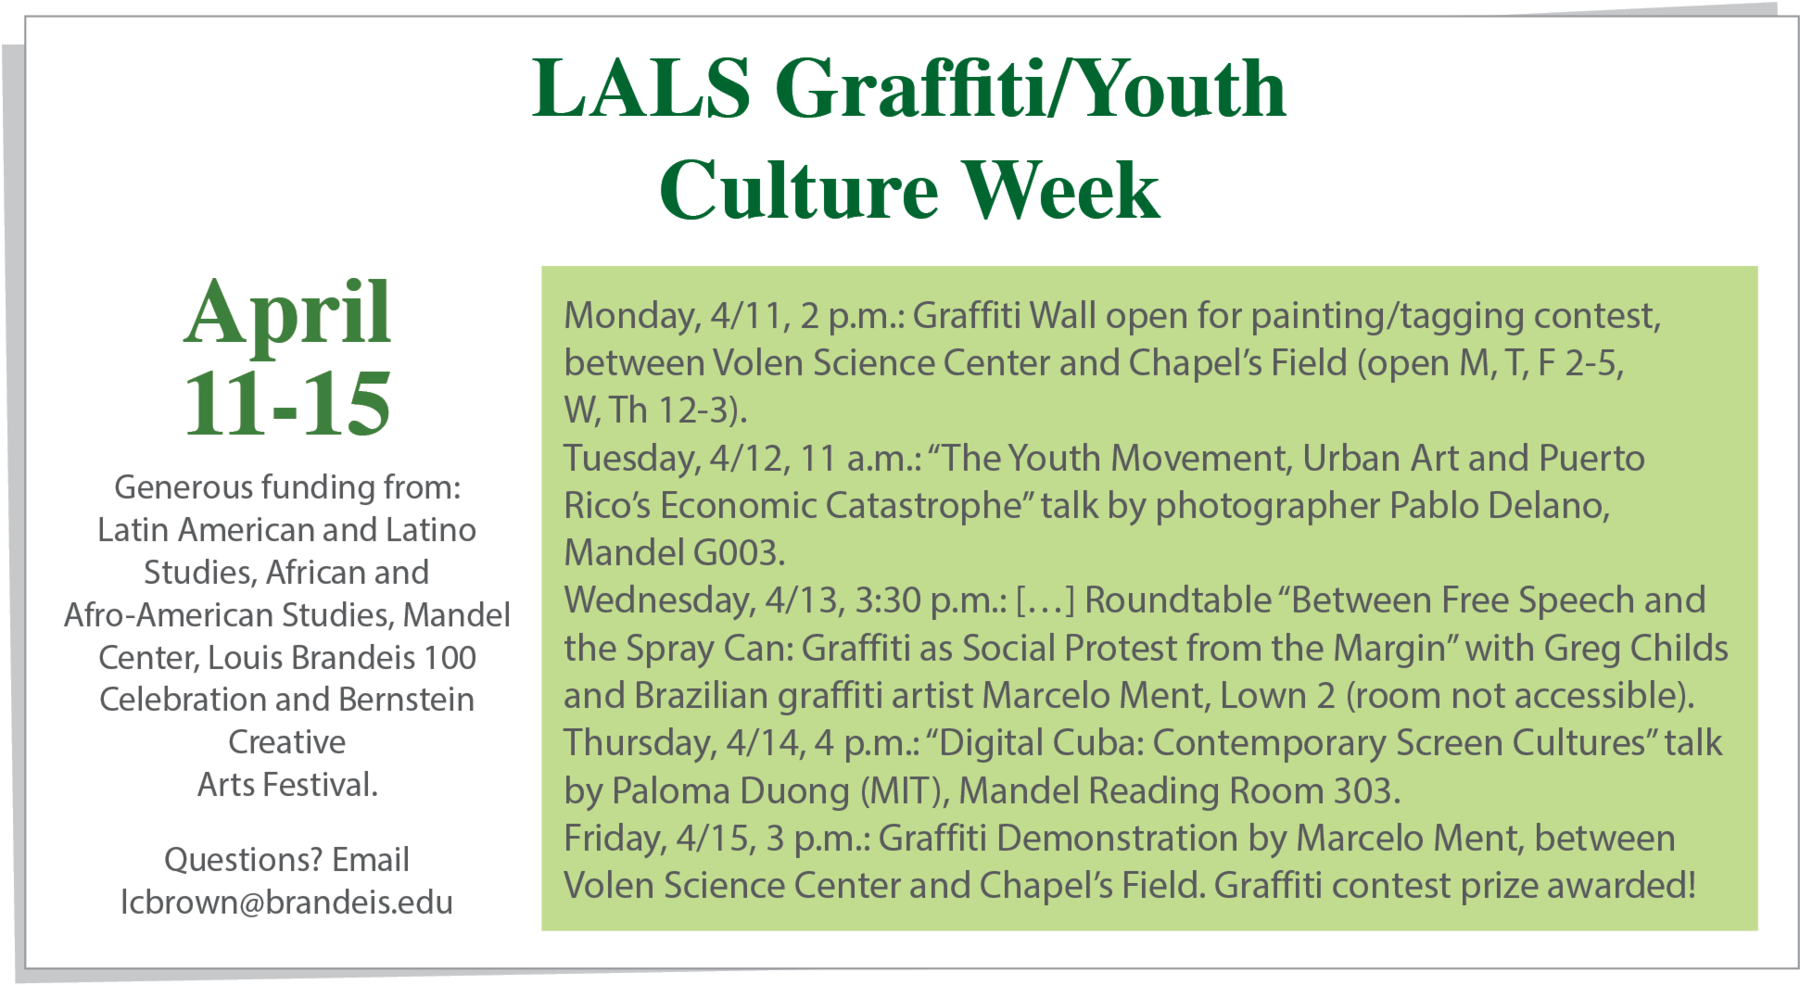 Cartaz. No topo, o texto em verde:  LALS Graffiti/Youth Culture Week. No lado esquerdo, o texto: April eleventh to fifteenth. Generous funding from: Latin American and Latino Studies, African and Afro-American Studies, Mandel Center, Louis Brandeis one hundred, Celebration and Bernstein Creative Arts Festival. Questions? Email lcbrown@brandeis.edu. No centro, dentro de um quadrado verde, o texto: Monday, April eleventh, two p.m.: Graffiti Wall open for painting, tagging contest, between Volen Science Center and Chapel's Field, open Mondays, Tuesdays, Fridays two to five, Wednesdays and Thursdays, twelve to three. Tuesday, April twelfth. eleven a.m.: The Youth Movement, Urban Art and Puerto Rico's Economic Catastrophe talk by photographer Pablo Delano, Mandel G O O three. Wednesday, April thirteenth, three thirty p.m. Marcas de supressão. Roundtable Between Free Speech and the Spray Can: Graffiti as Social Protest from the Margin with Greg Childs and Brazilian graffiti artist Marcelo Ment, Lown two, room not accessible. Thursday, April fourteenth, four p.m.: Digital Cuba: Contemporary Screen Cultures talk by Paloma Duong, MIT, Mandel Reading Room three oh three. Friday, April fifteenth, three p.m.: Graffiti Demonstration by Marcelo Ment, between Volen Science Center and Chapel's Field. Graffiti contest prize awarded!